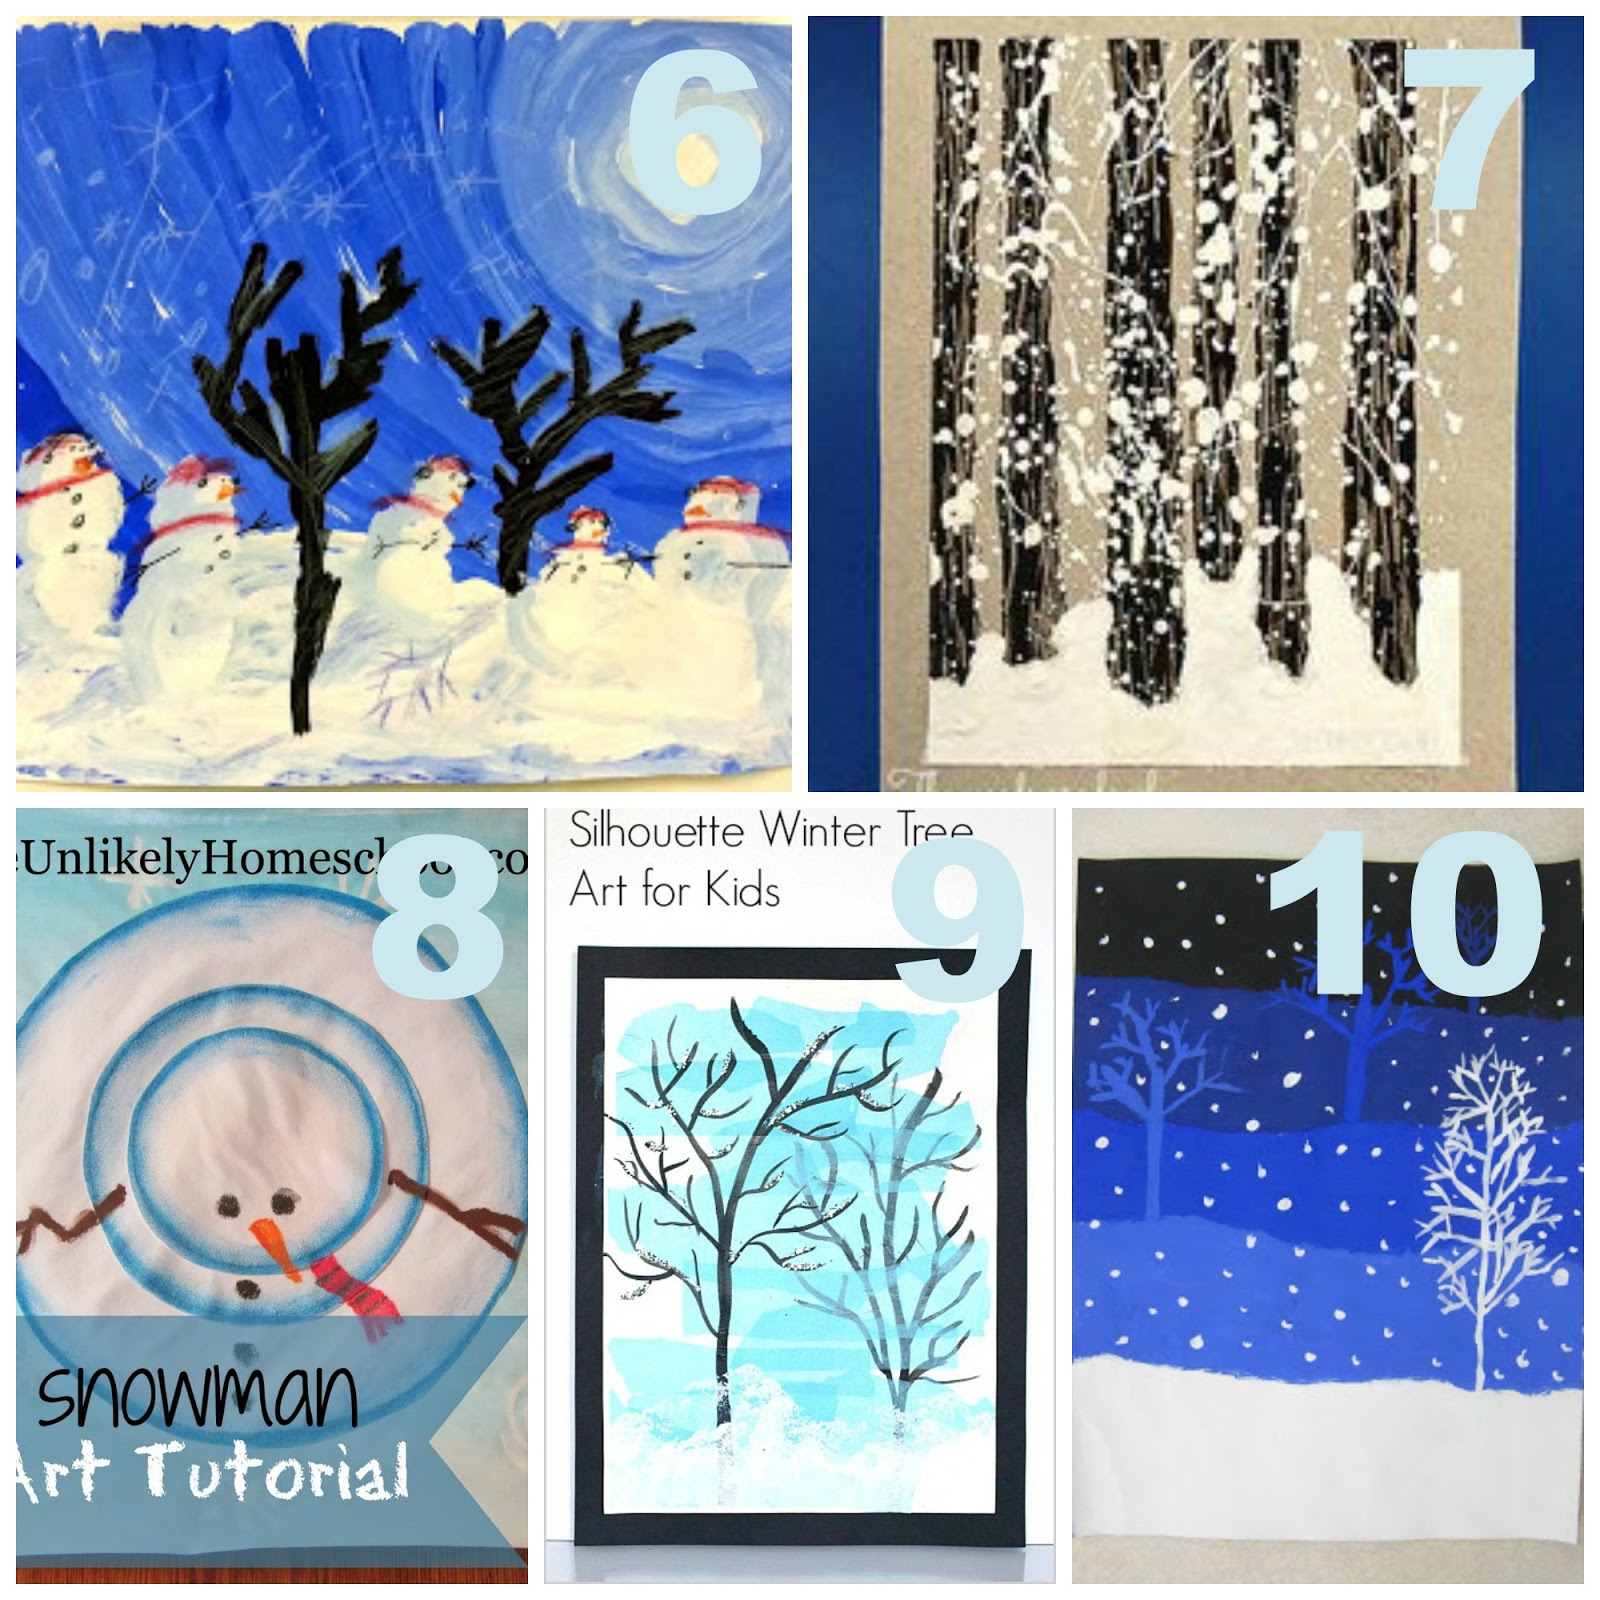 The Unlikely Homeschool 20 Winter Art Projects for Kids